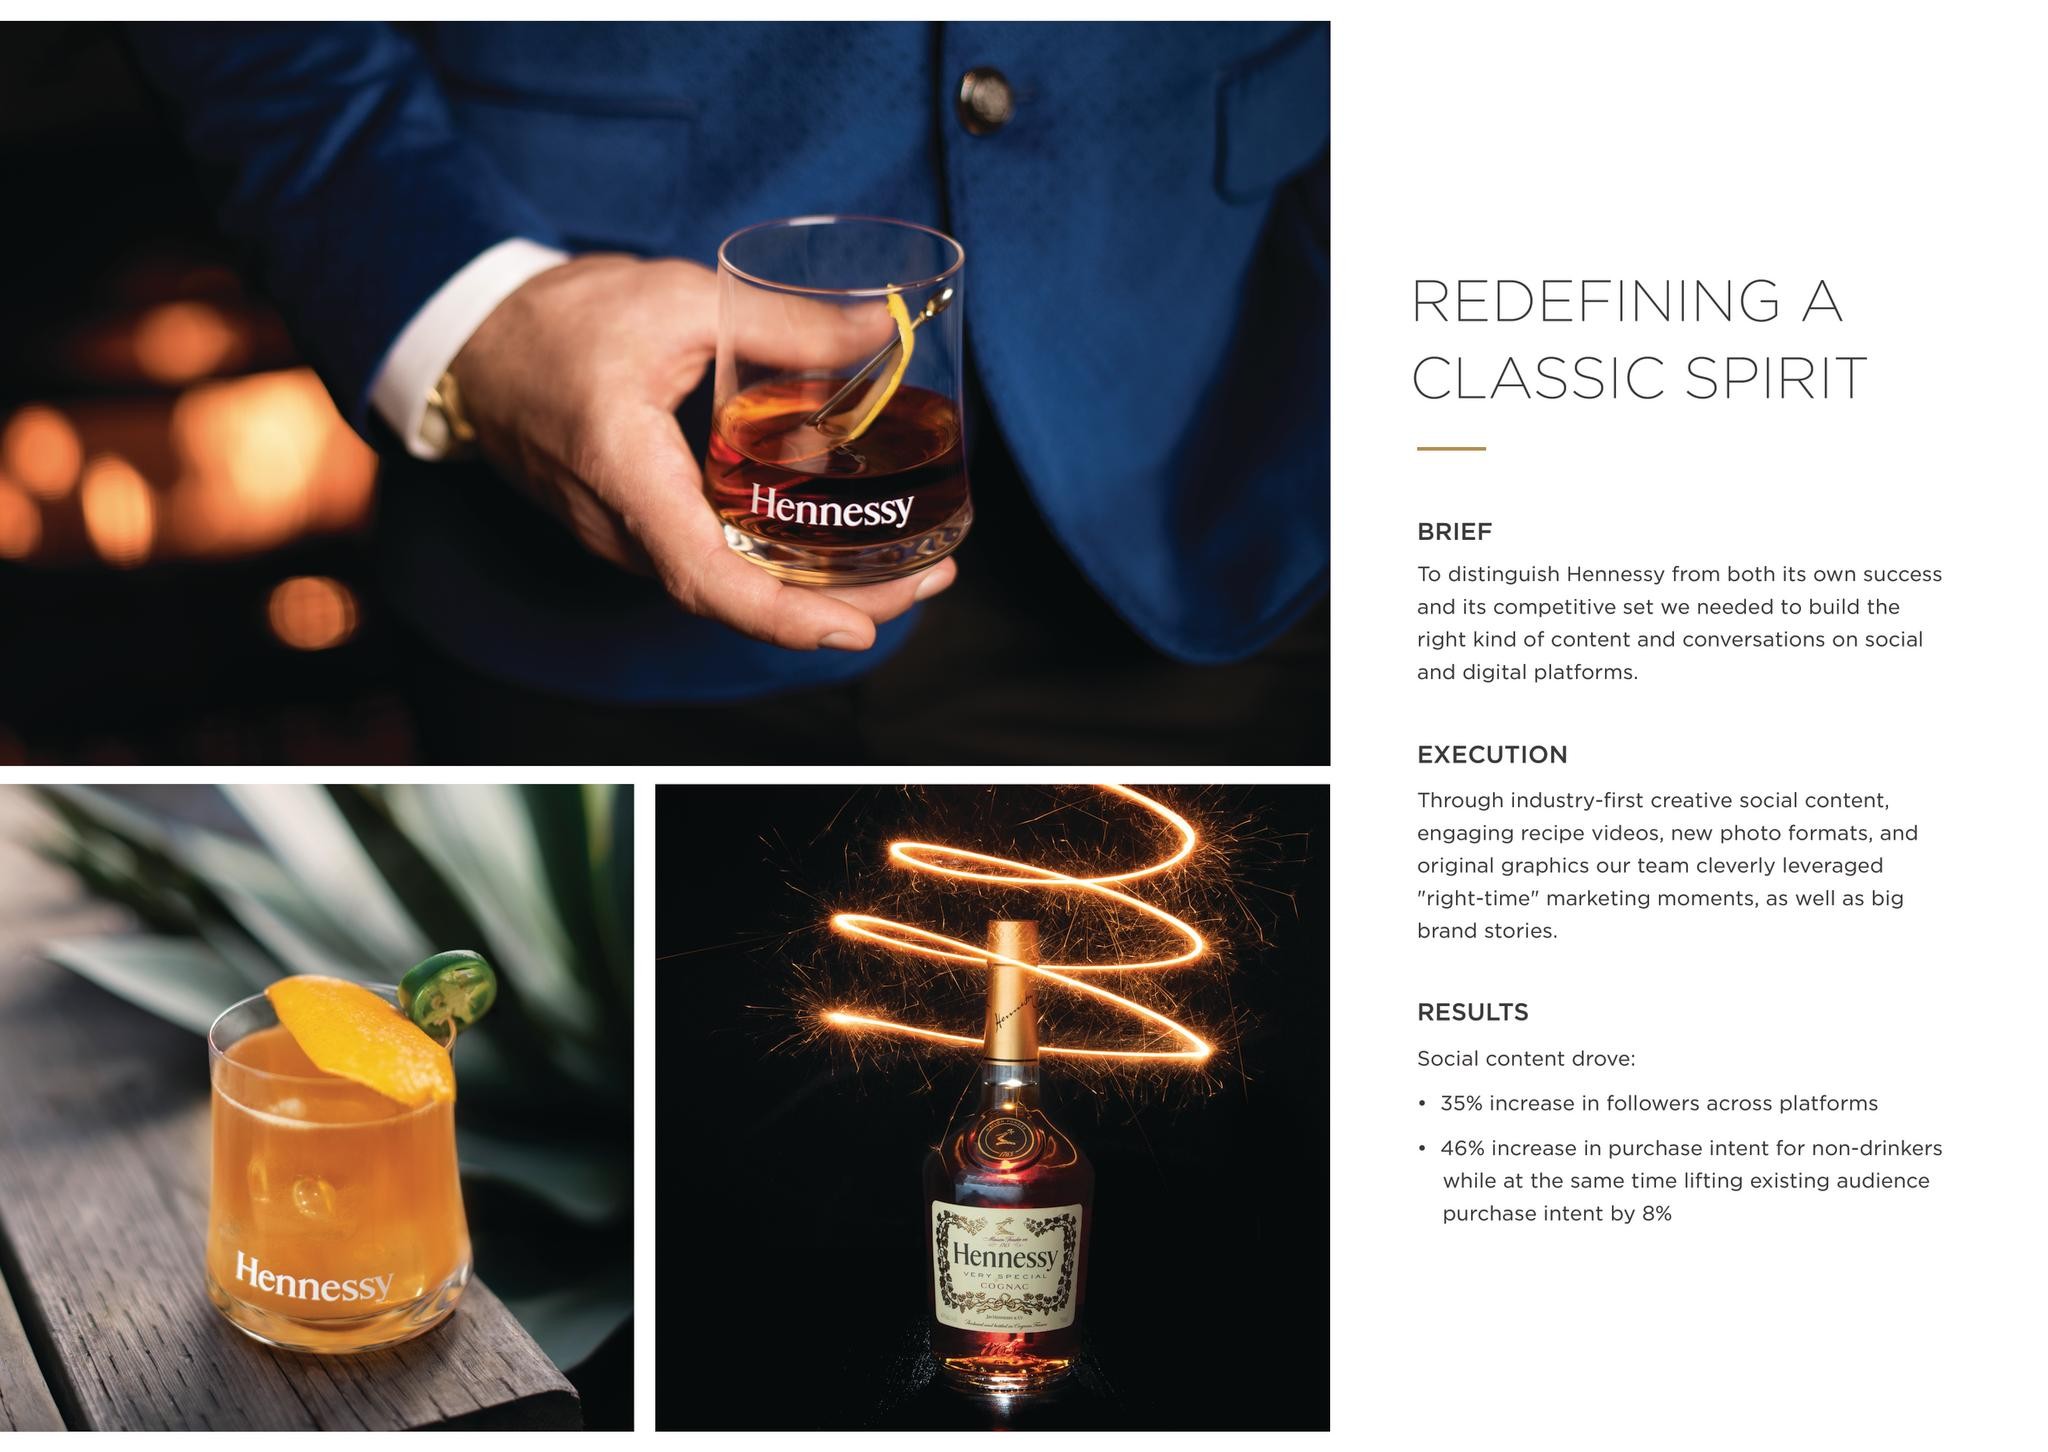 Redefining a Classic Spirit: Hennessy